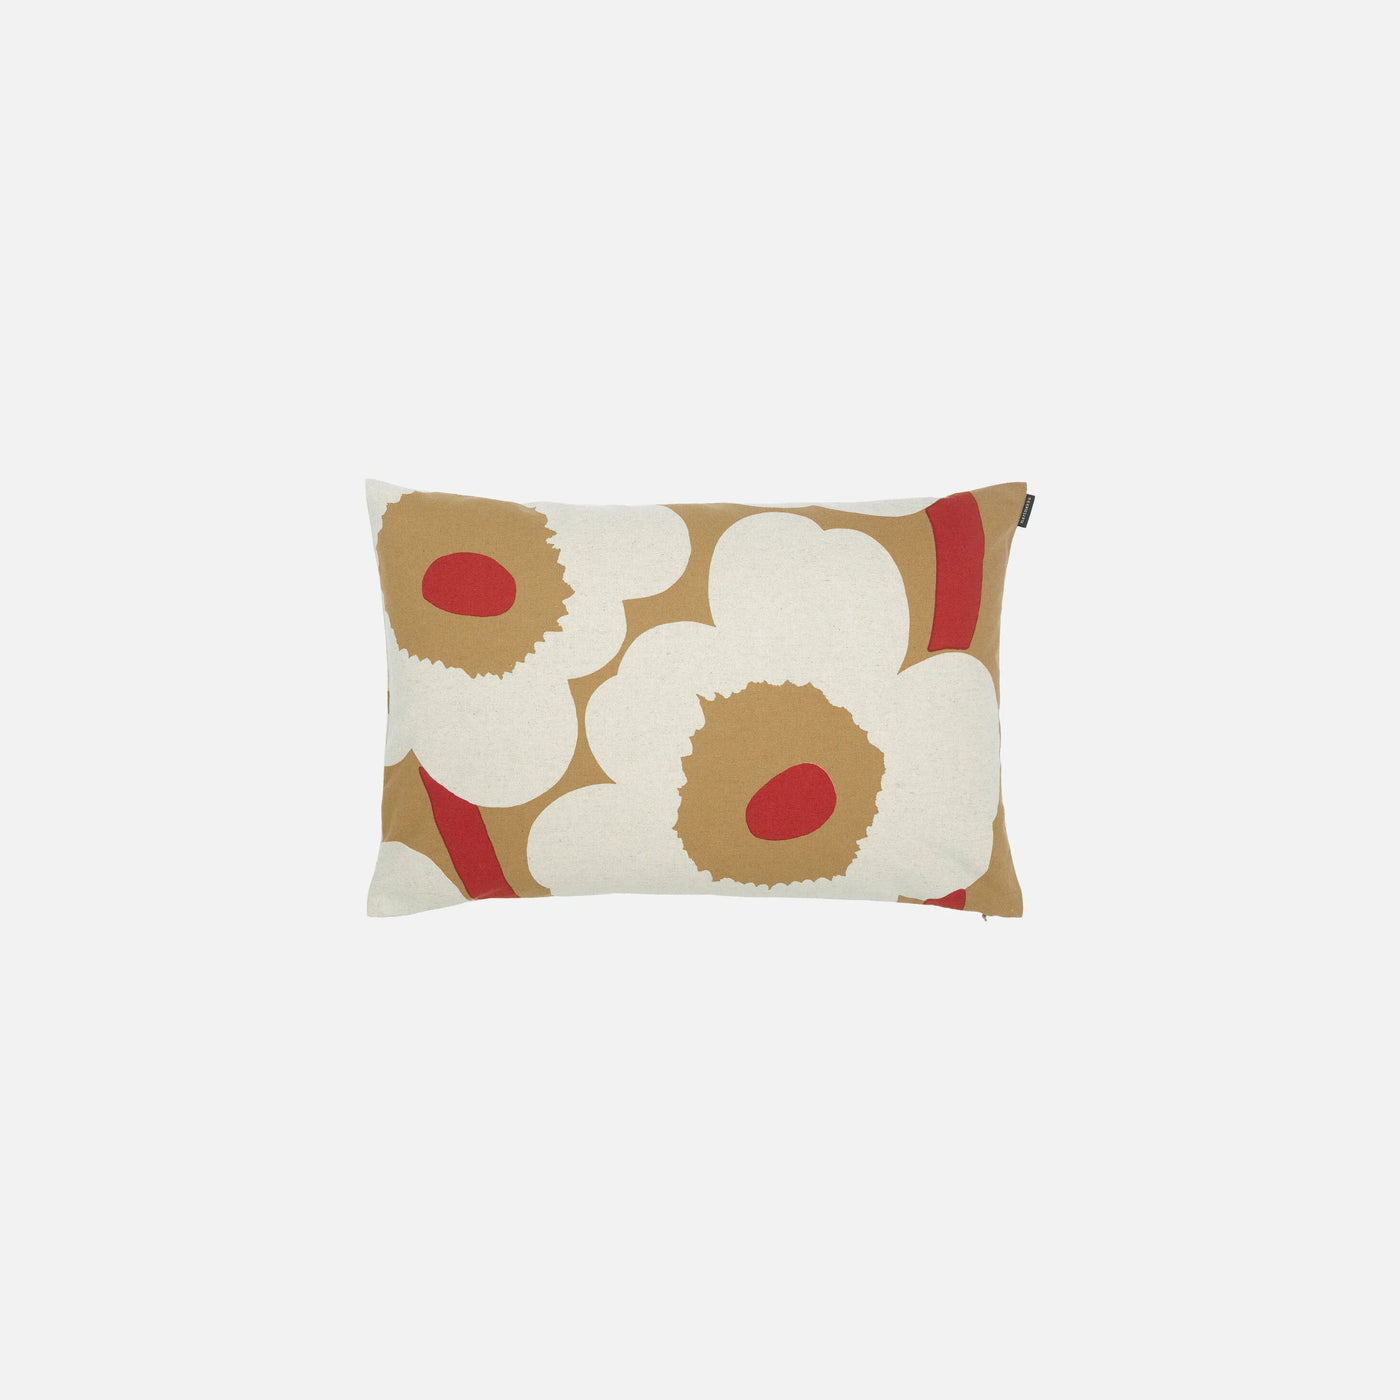 Unikko Cushion Cover 40 X 60cm - brown, red